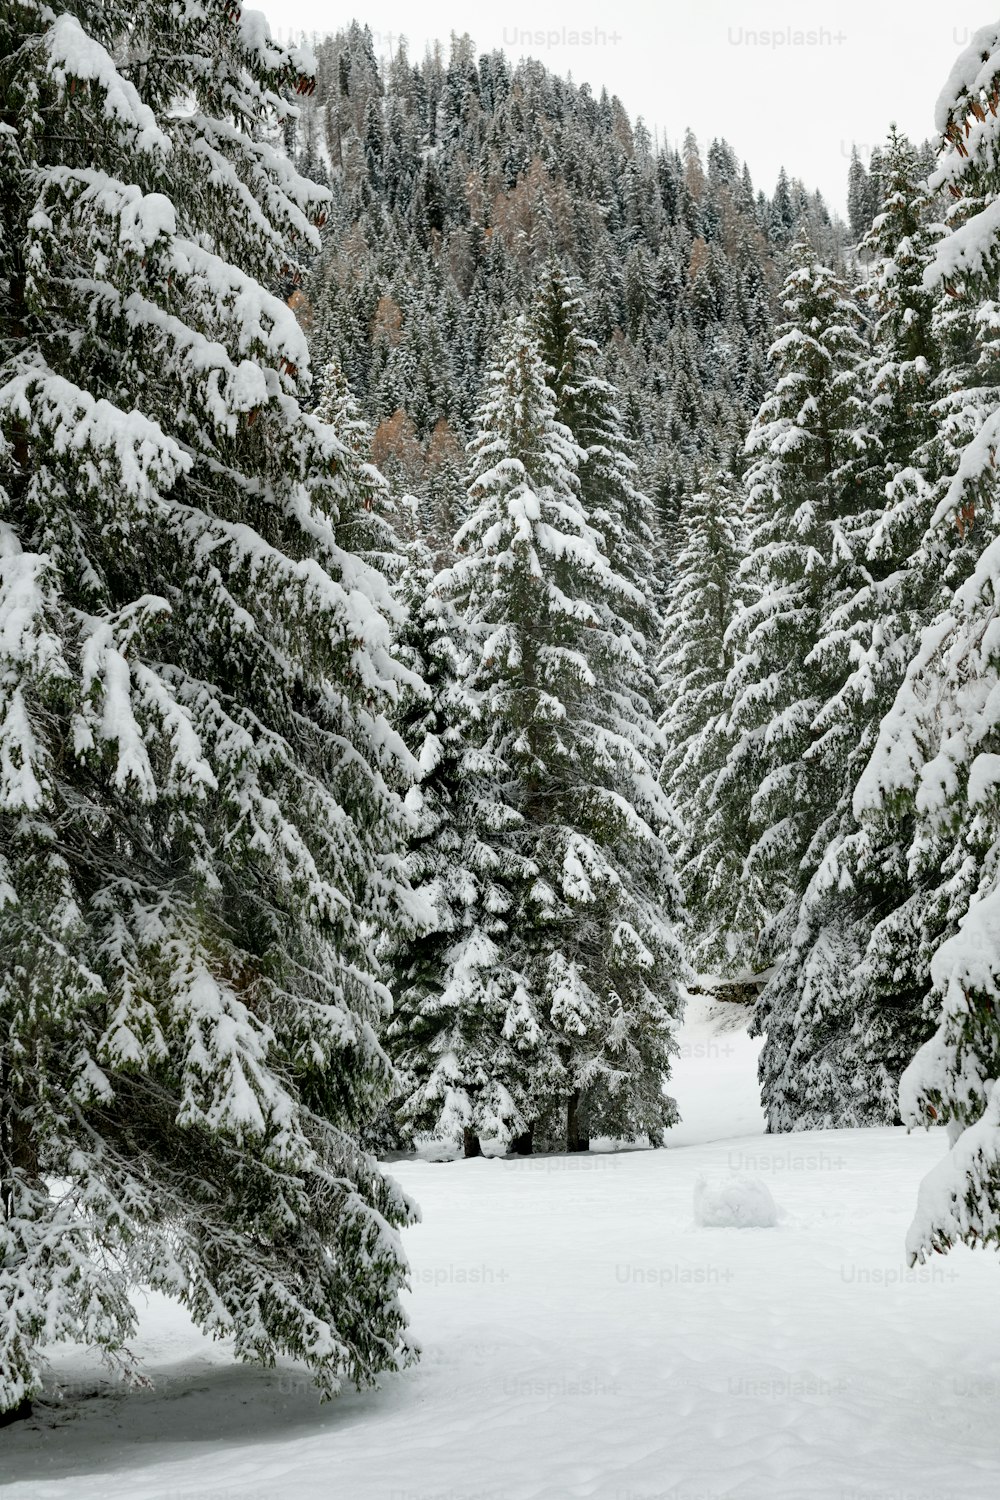 a person on skis in the middle of a snowy forest